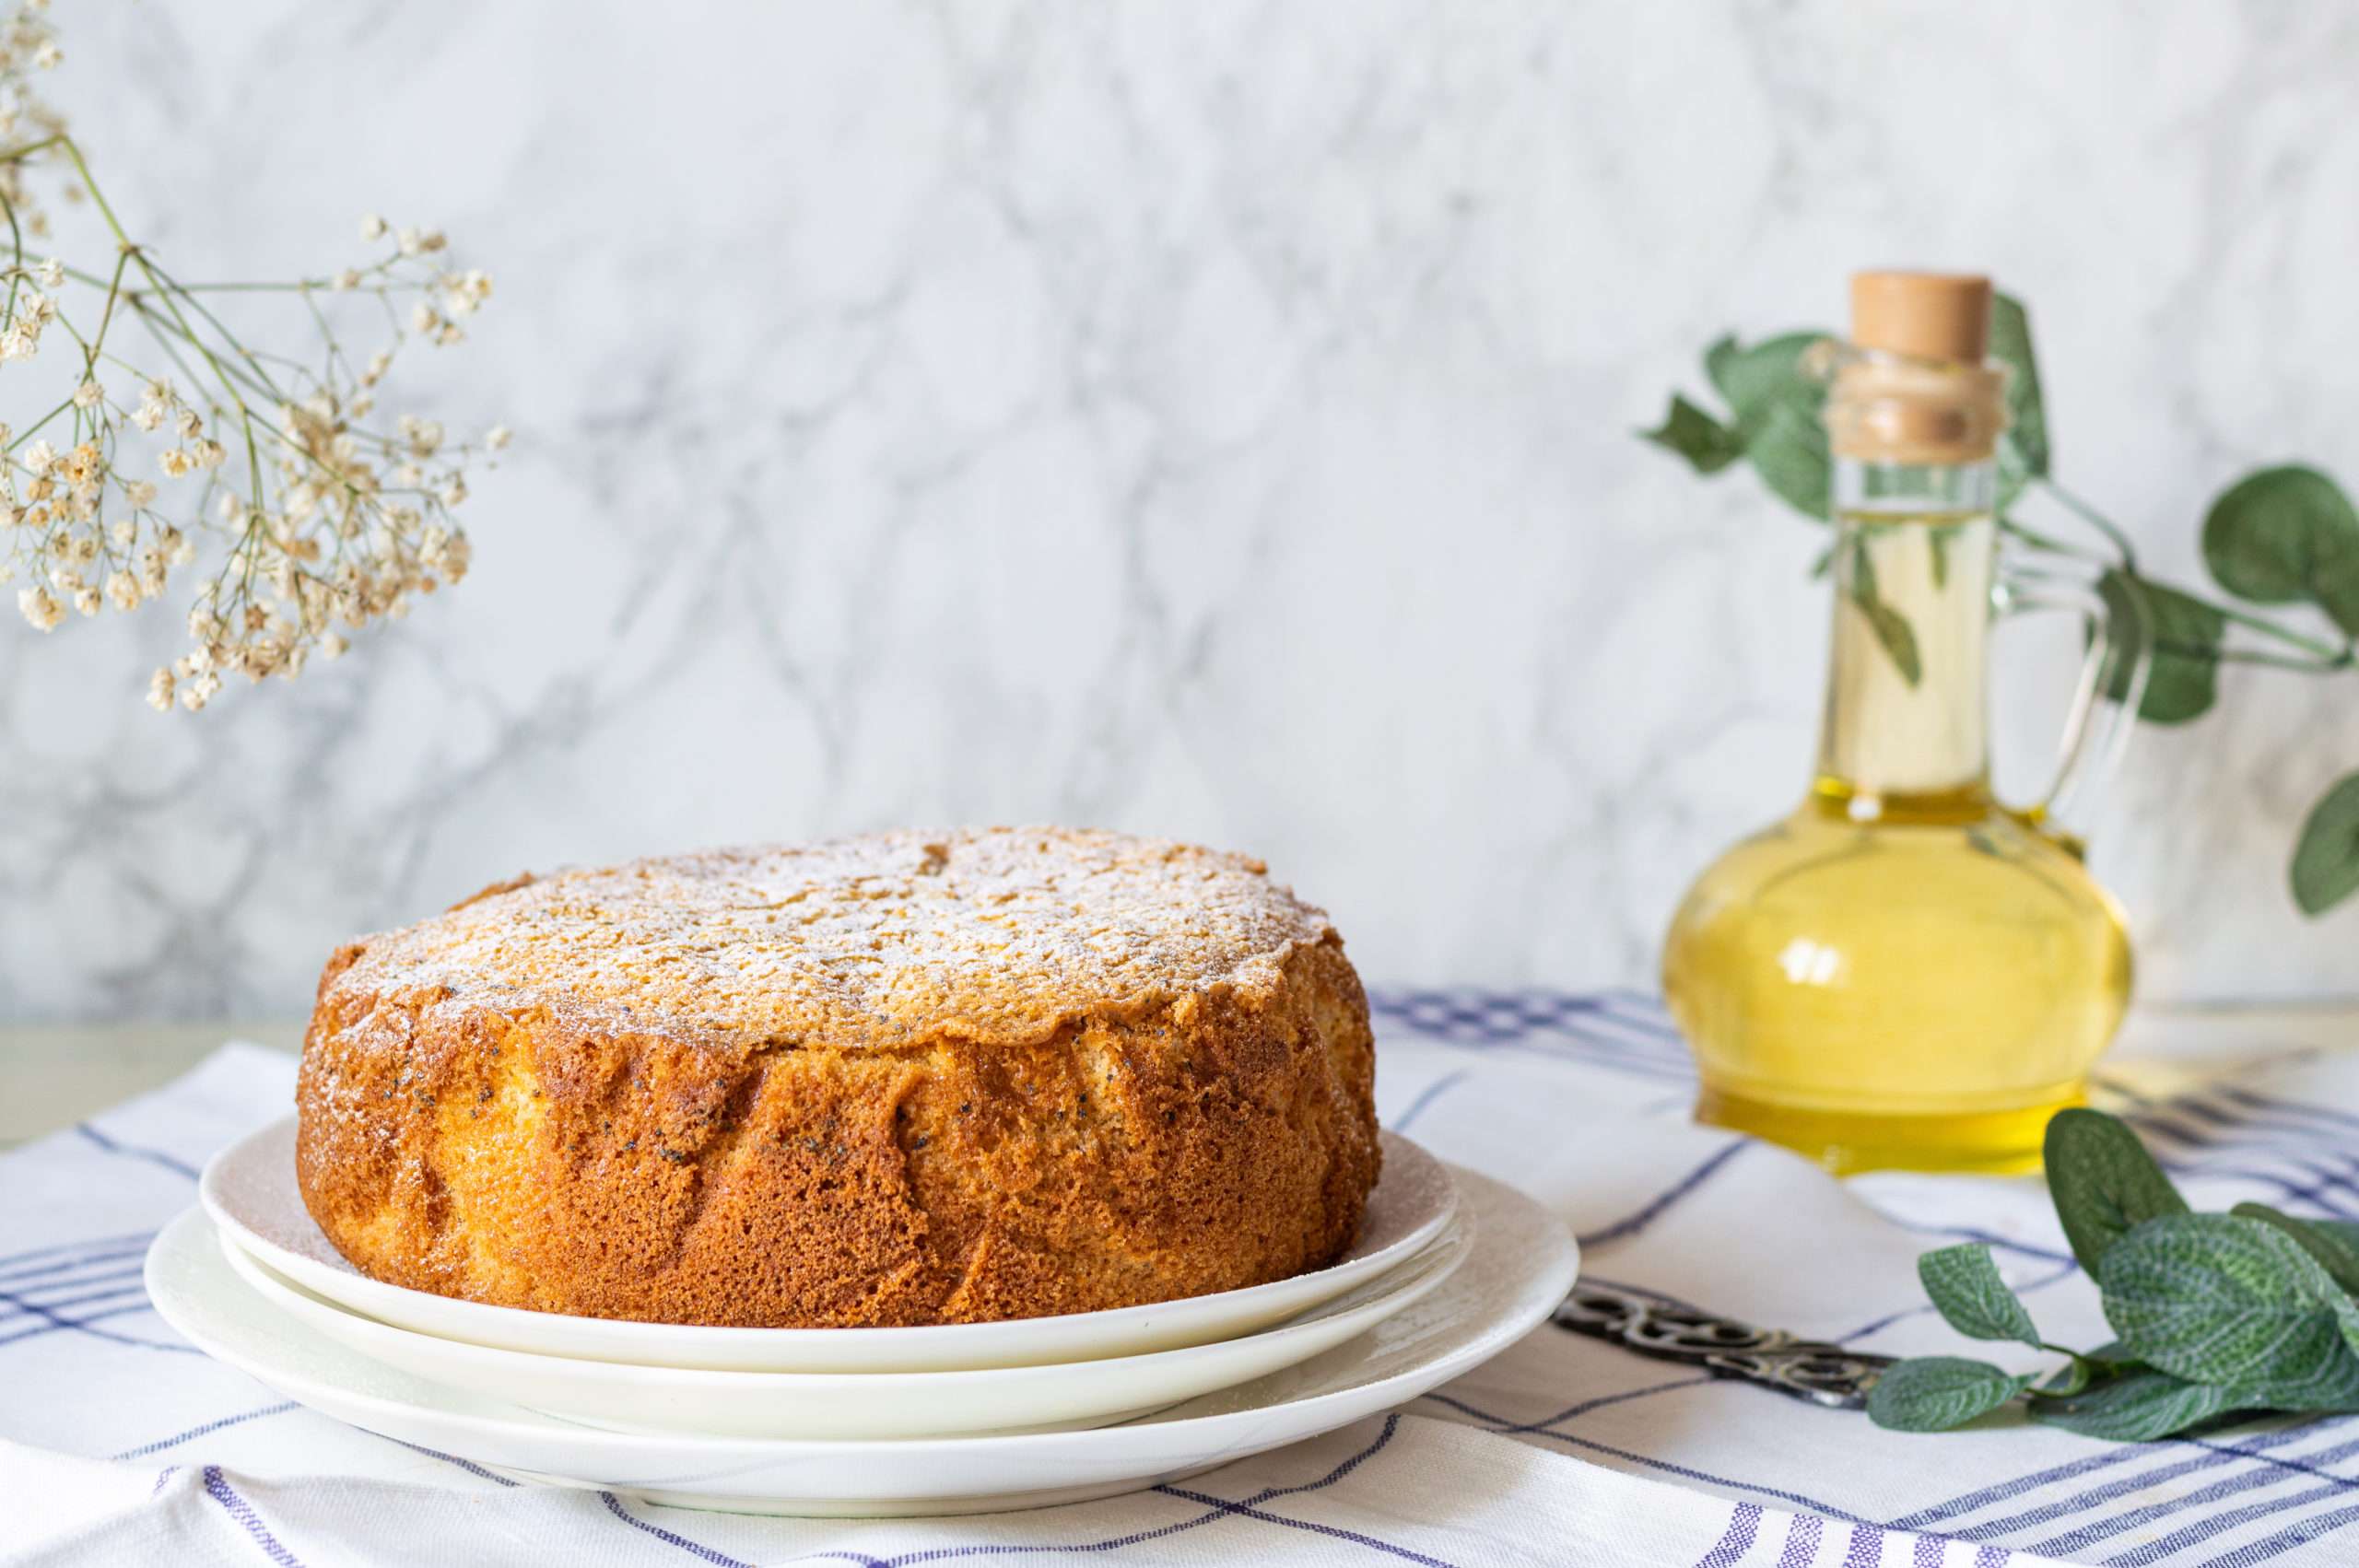 A classic olive oil cake sits elegantly atop a pristine white tablecloth adorned with blue stripes. Accompanying it, a bottle of premium olive oil stands nearby, while decorative green plants add a touch of freshness and charm to the scene.